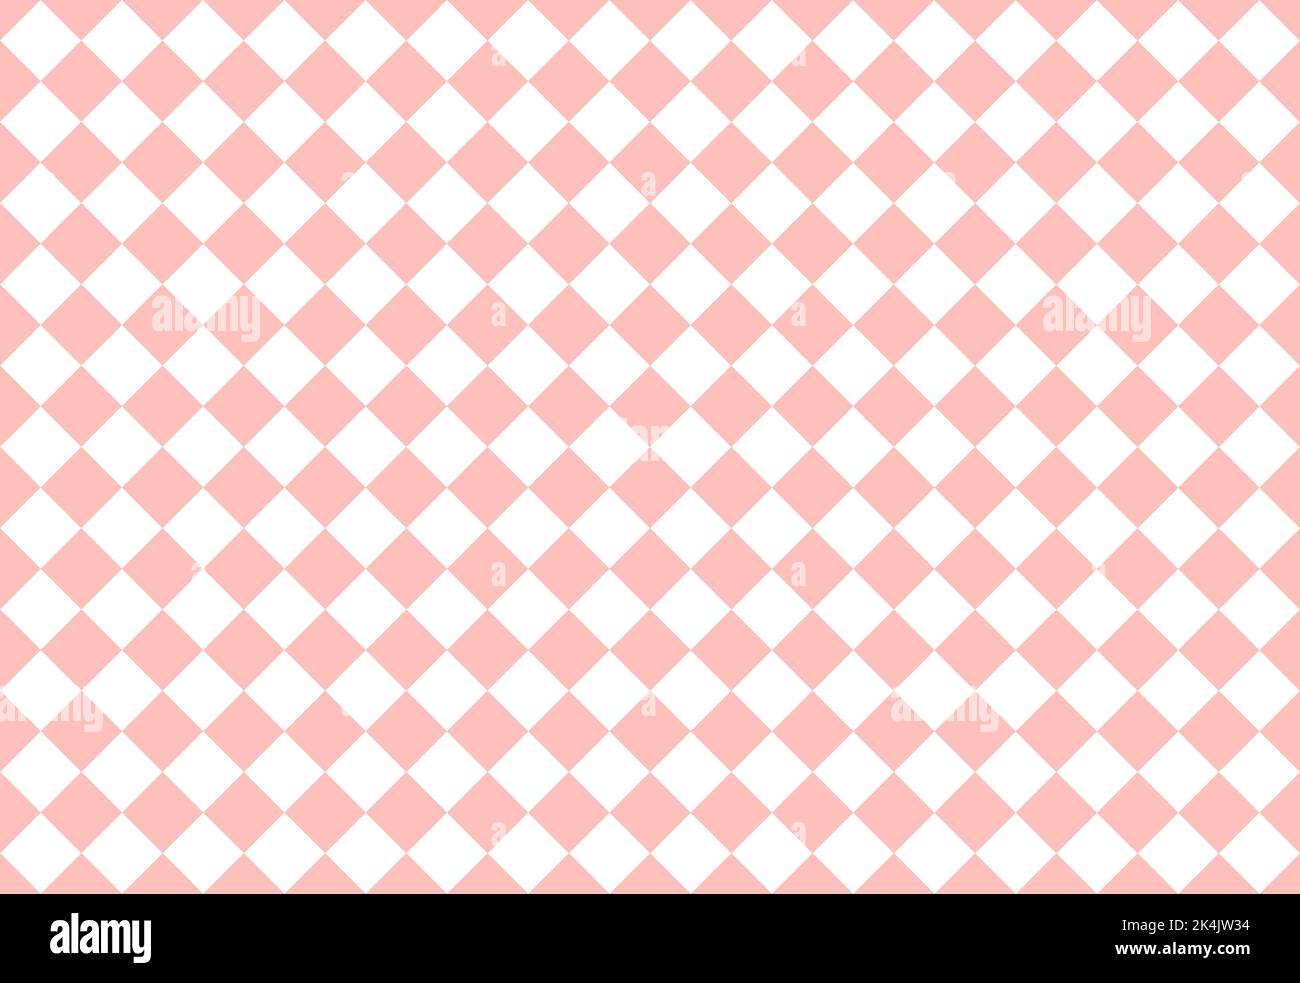 Pink and white Checkered diamond background seamless pattern. Vector illustration Stock Vector